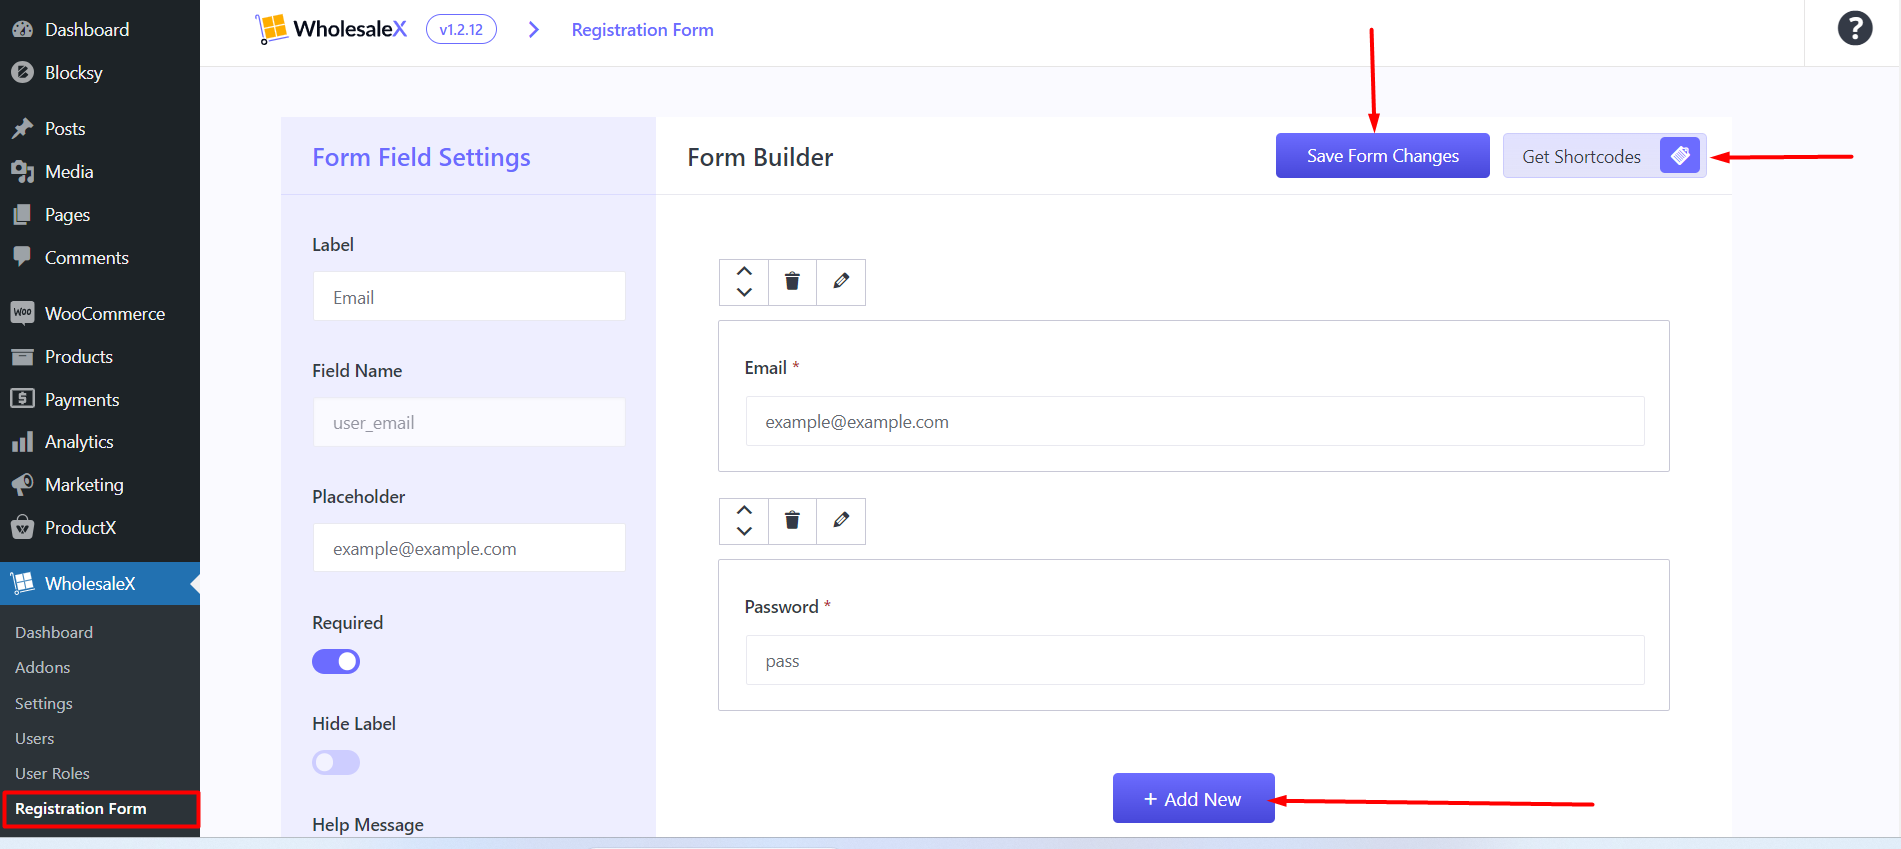 How to Find the Registration Form Shortcode? 